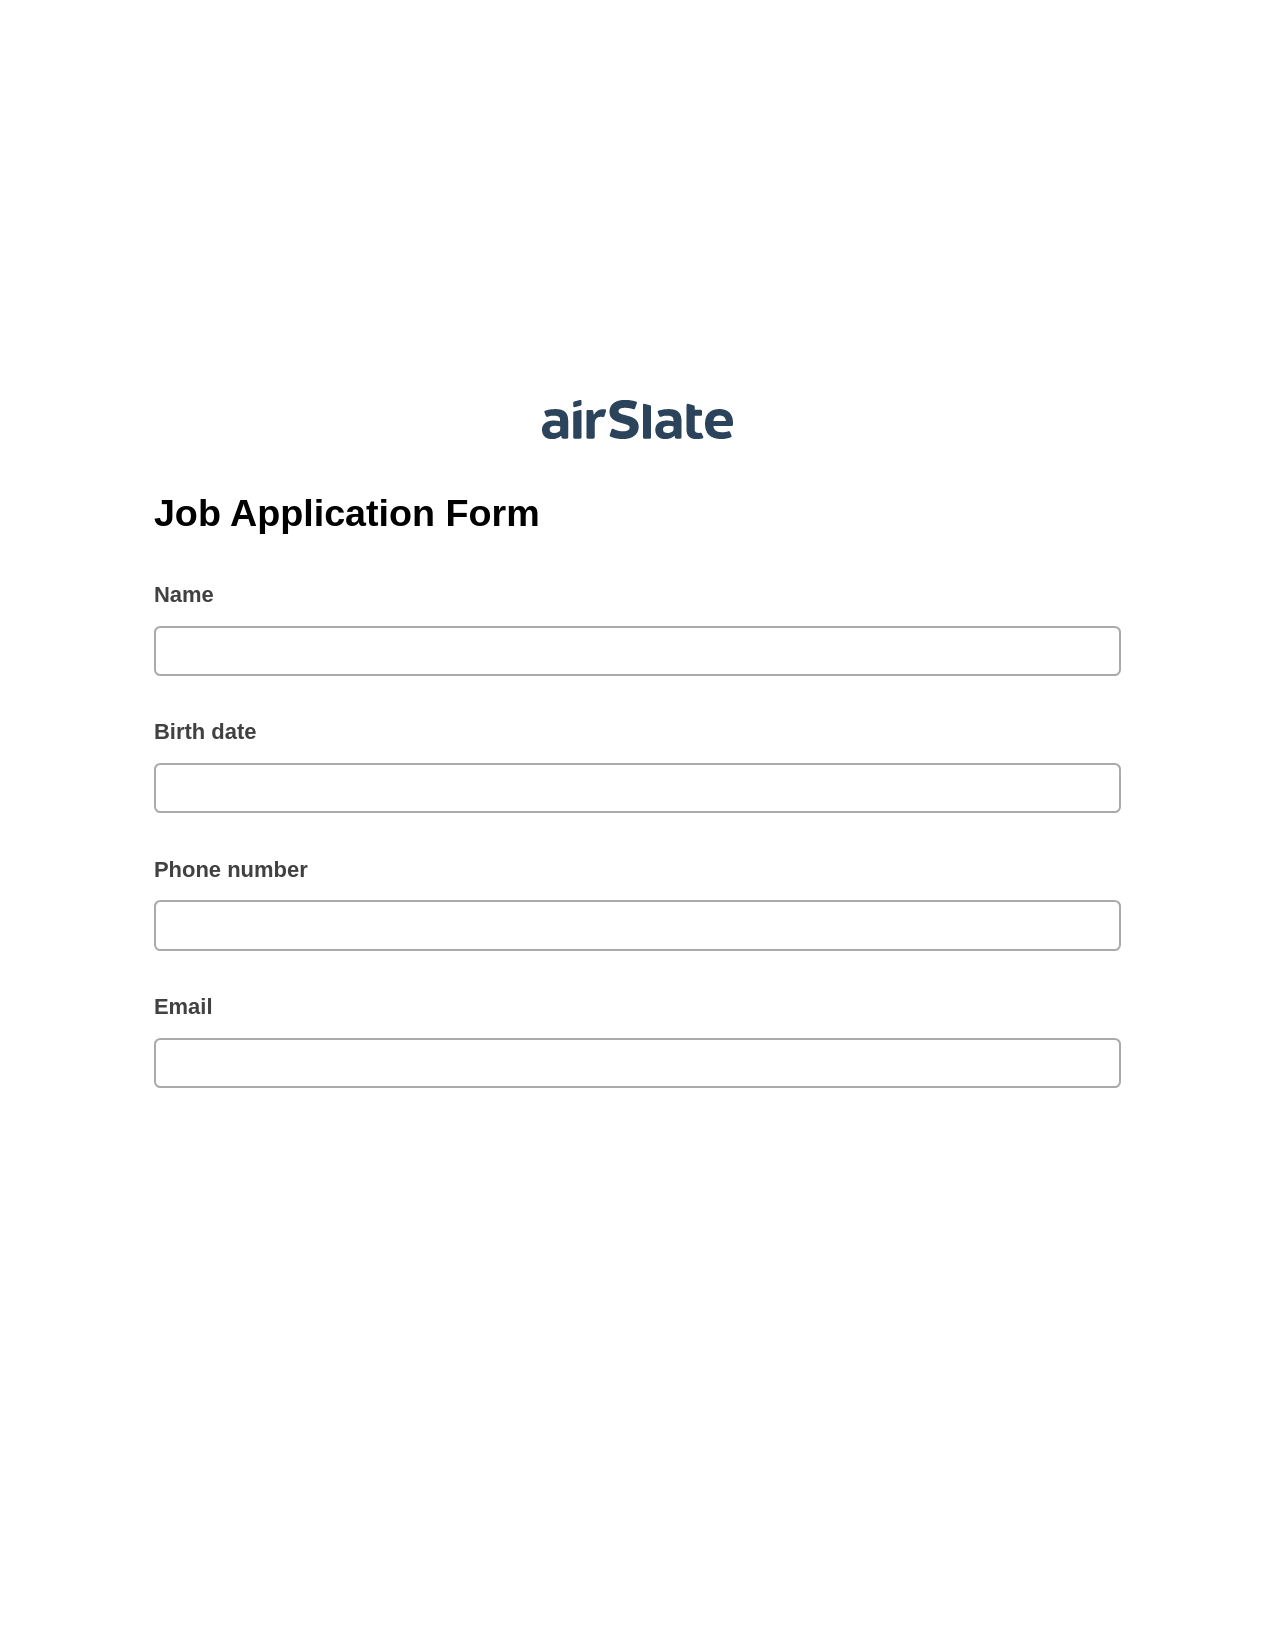 Job Application Form Pre-fill from Google Sheets Bot, System Bot - Create a Slate in another Flow, Webhook Postfinish Bot